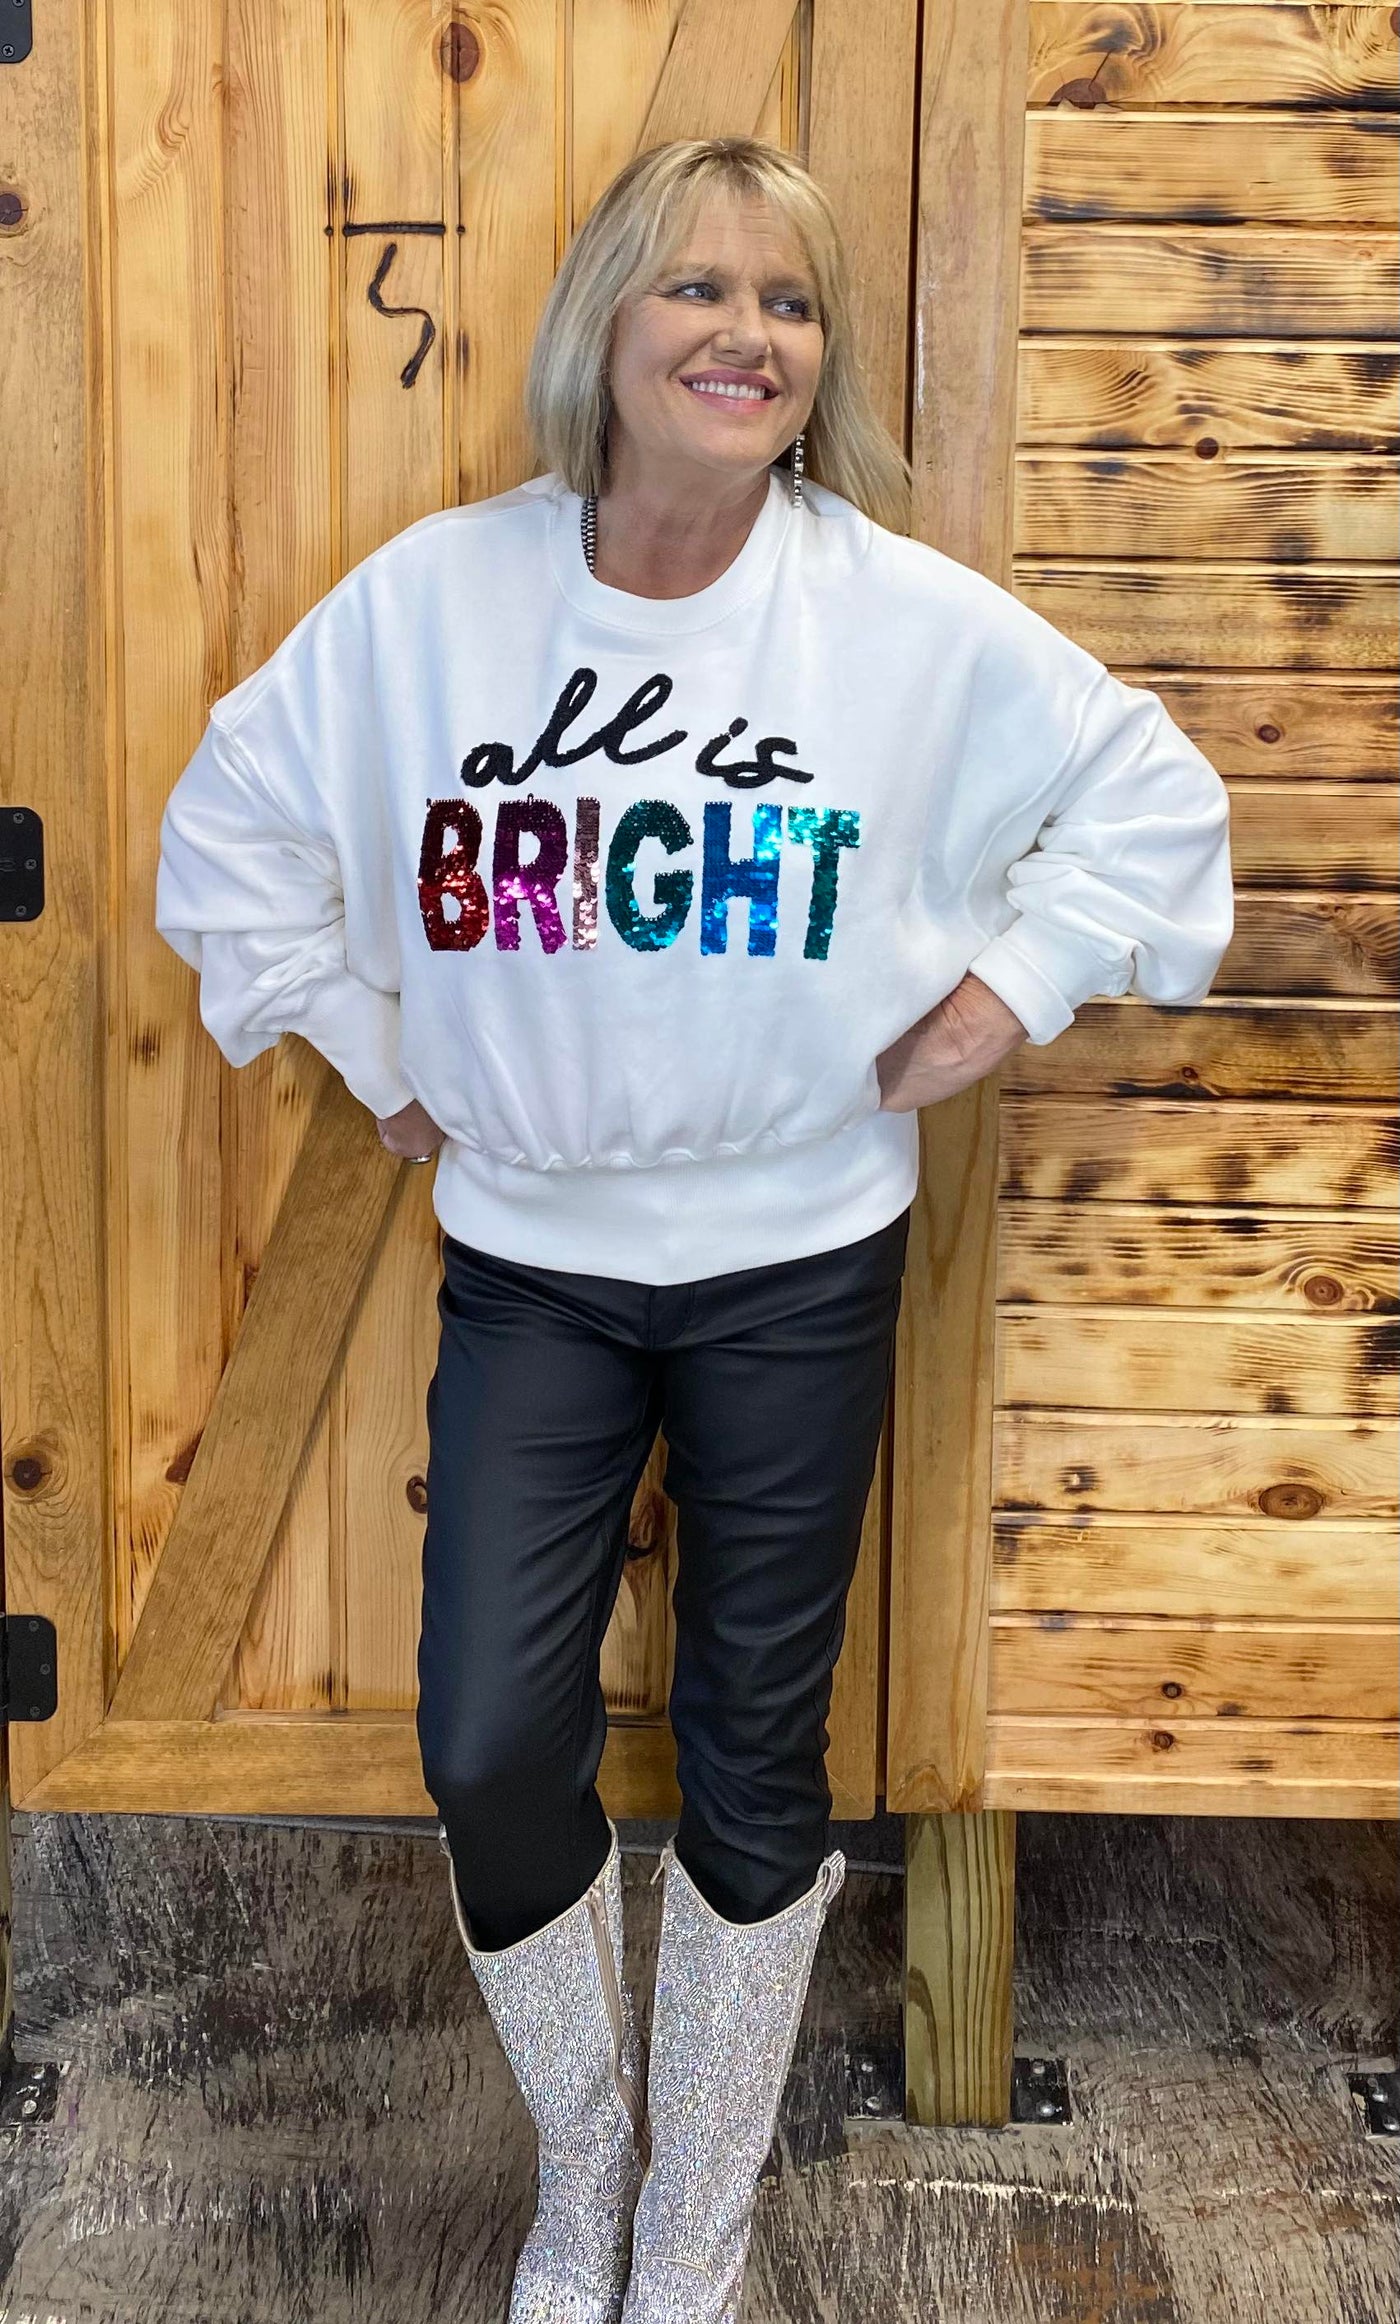 SALE- All is Bright Sequin & Chenille Sweatshirt from August Bleu